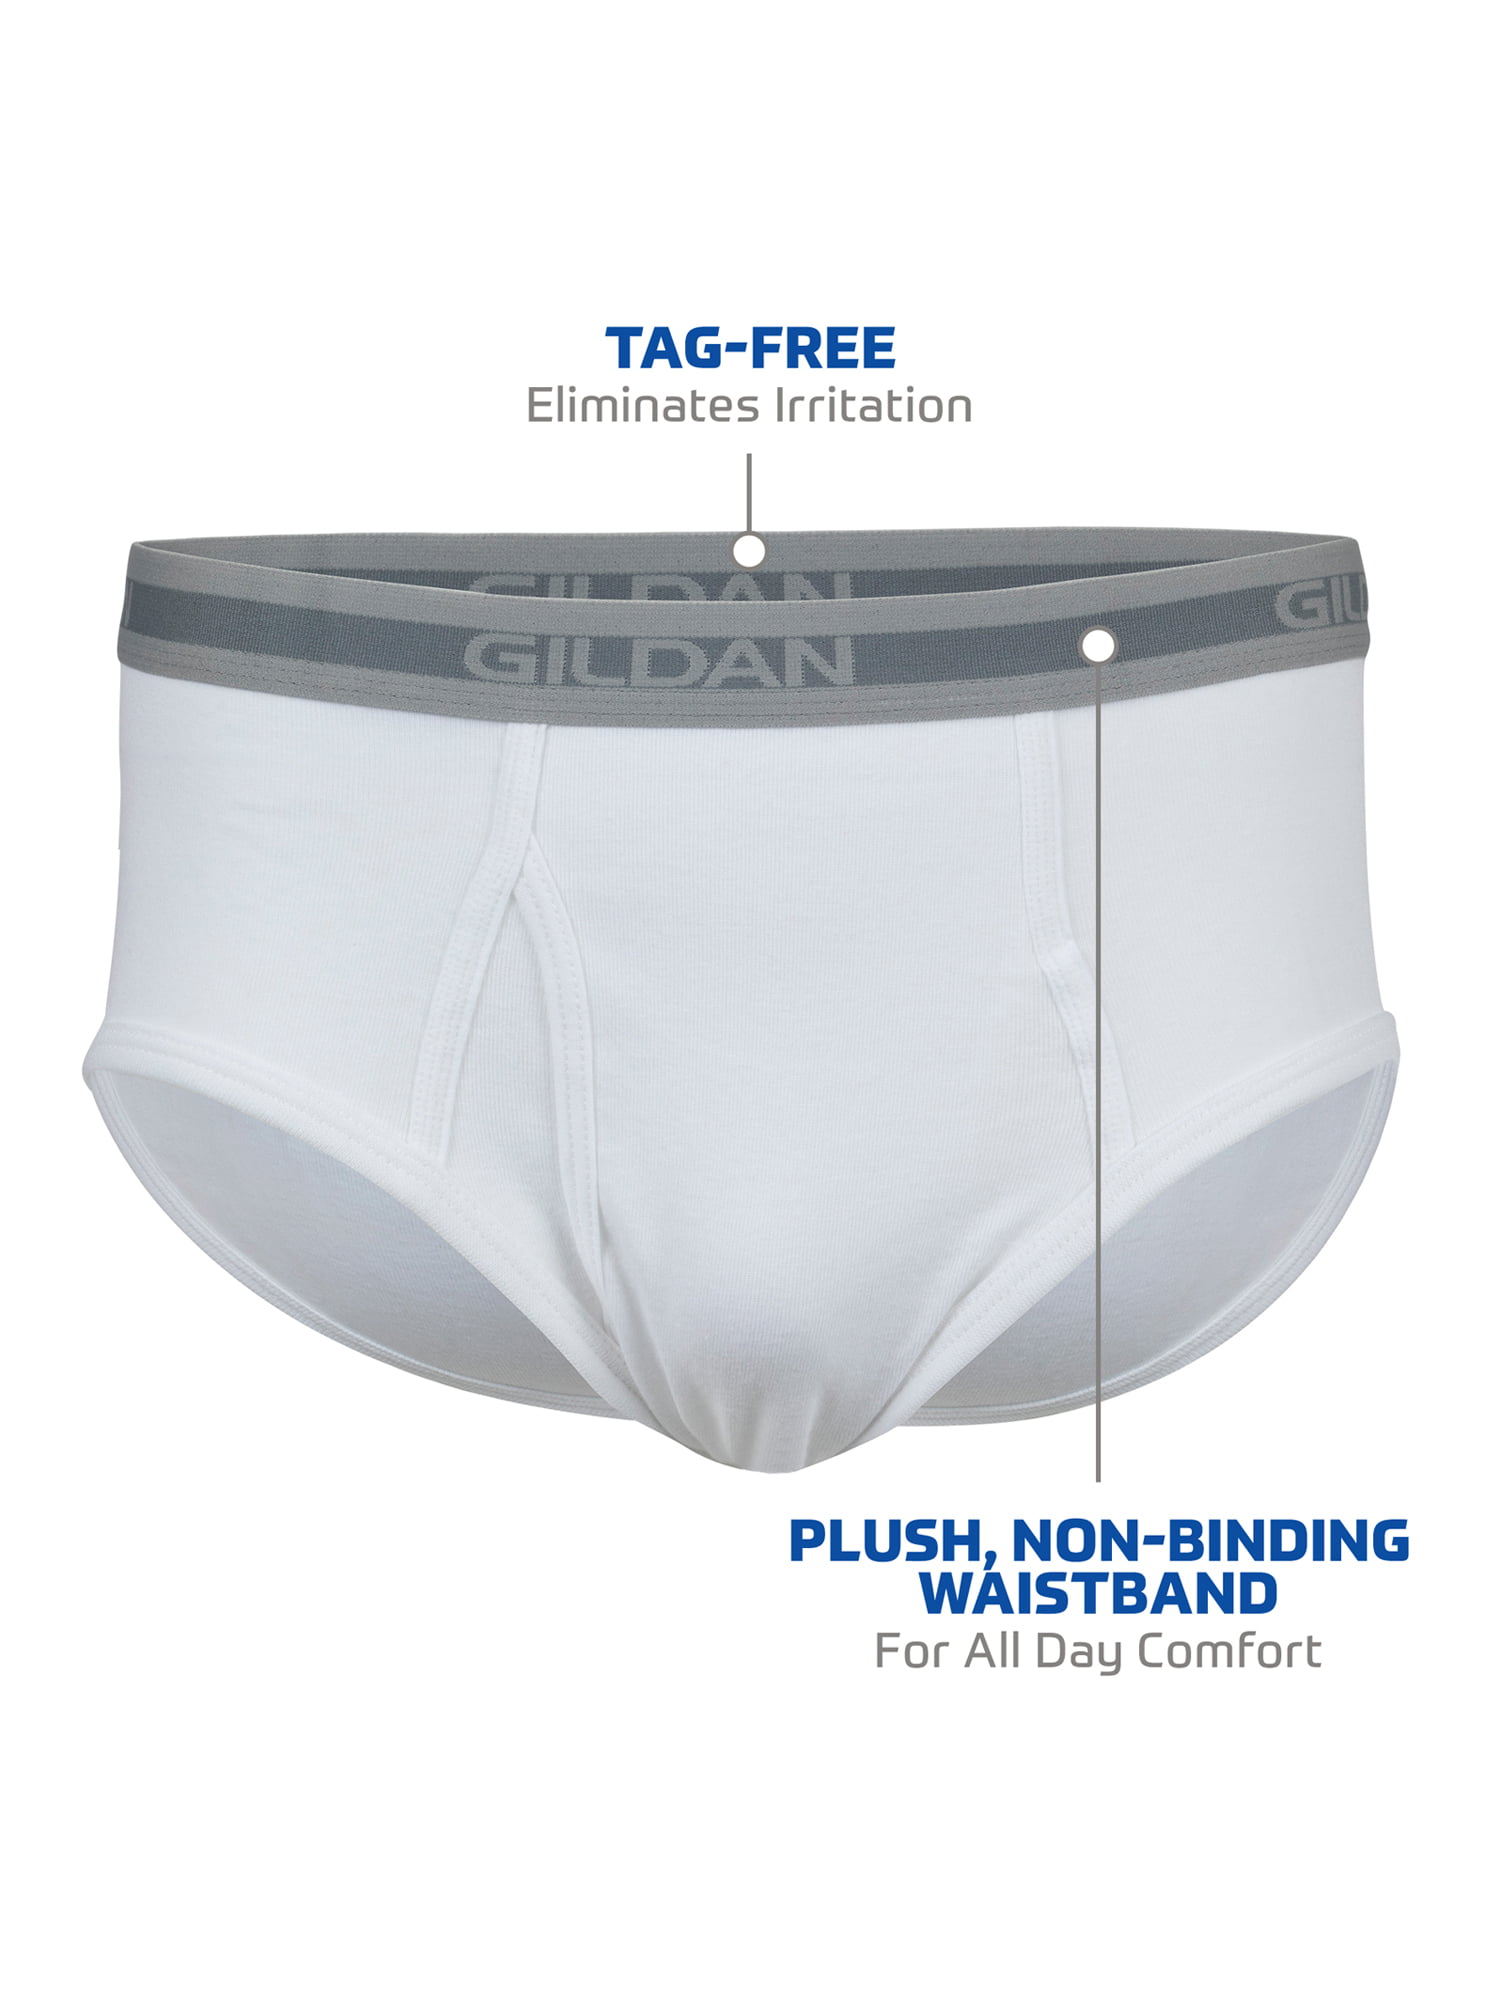 Gildan White Briefs (Tighty Whities) Multipack Unboxing and Review 